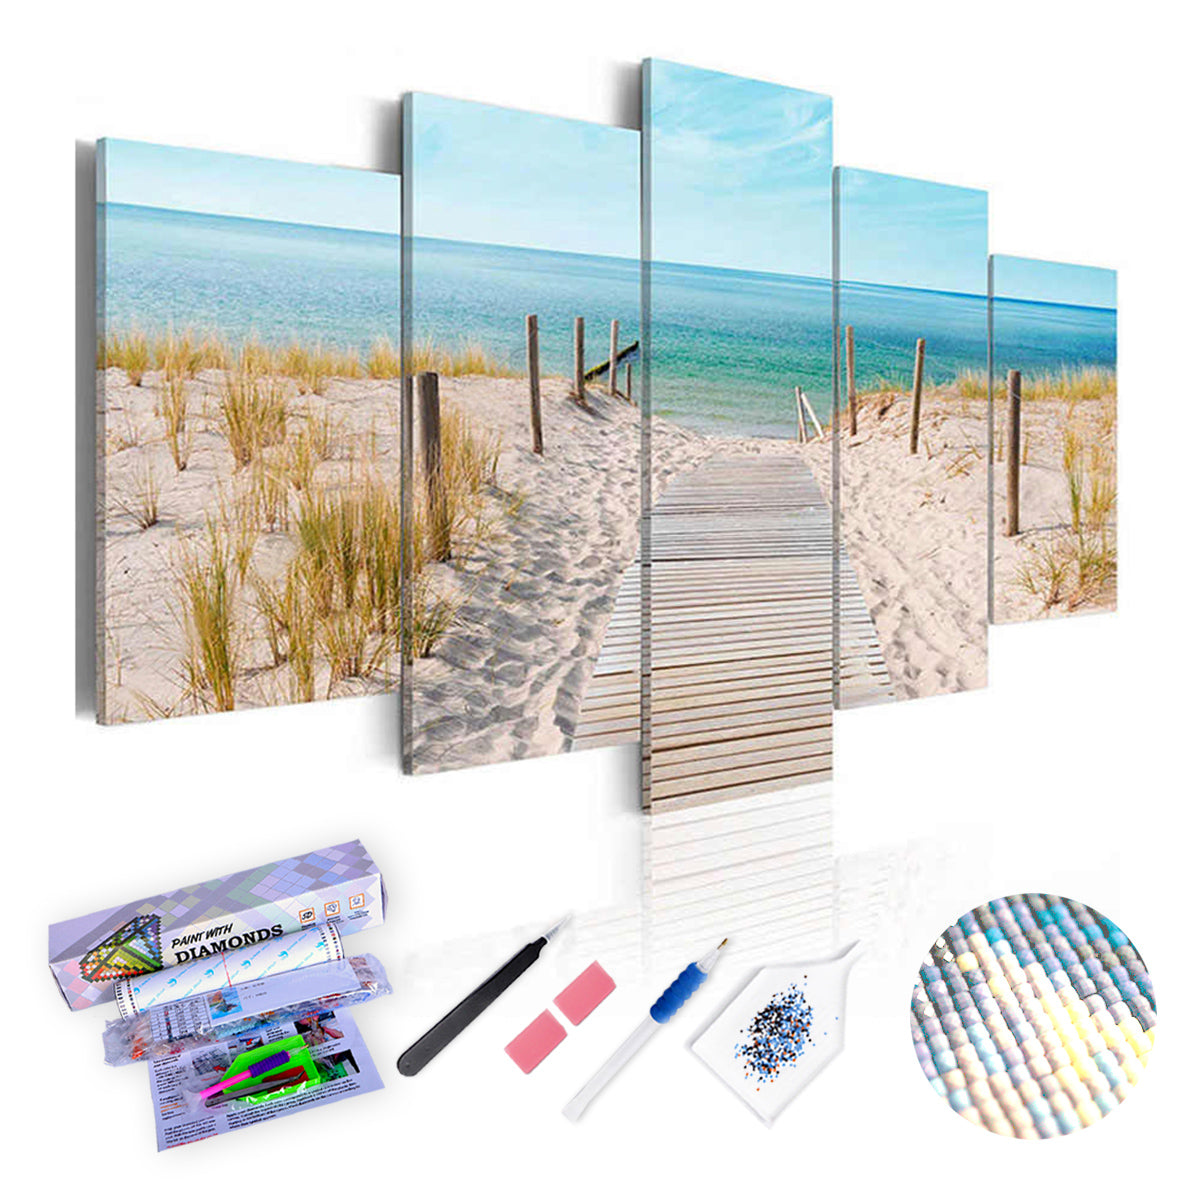 Sparkly Selections Ocean in a Glass Diamond Painting Kit, Round Diamonds